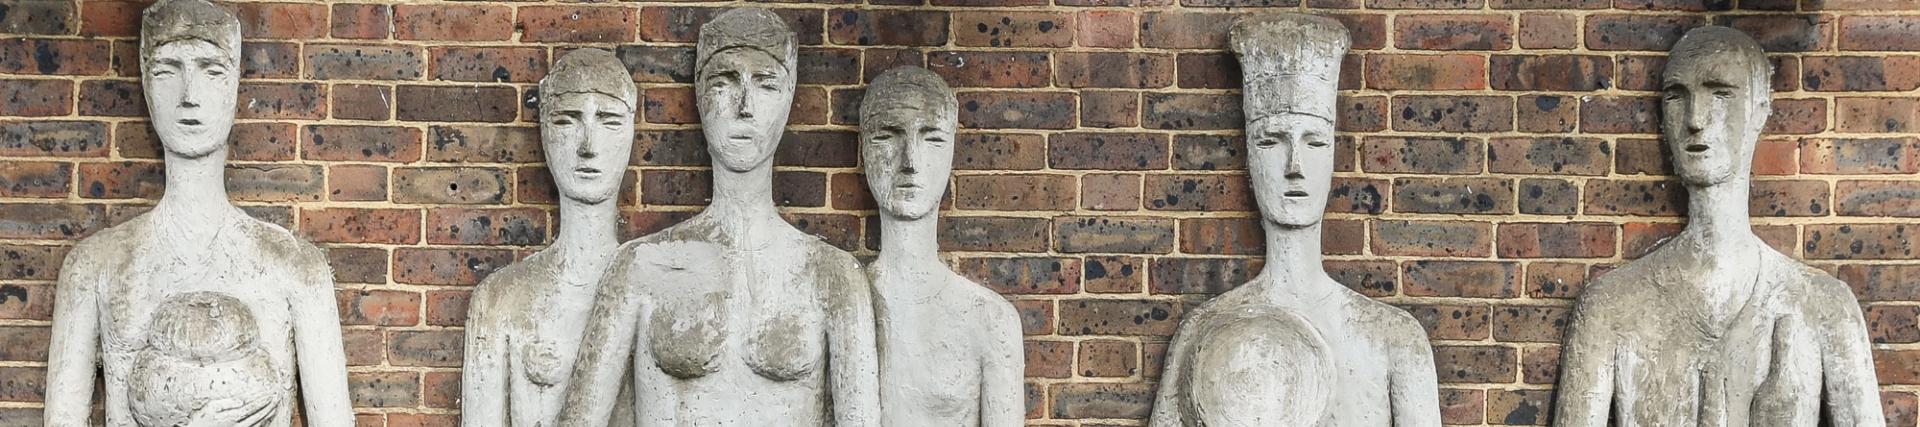 Stone sculptures against brick wall at St. Mary's Campus in Ealing.